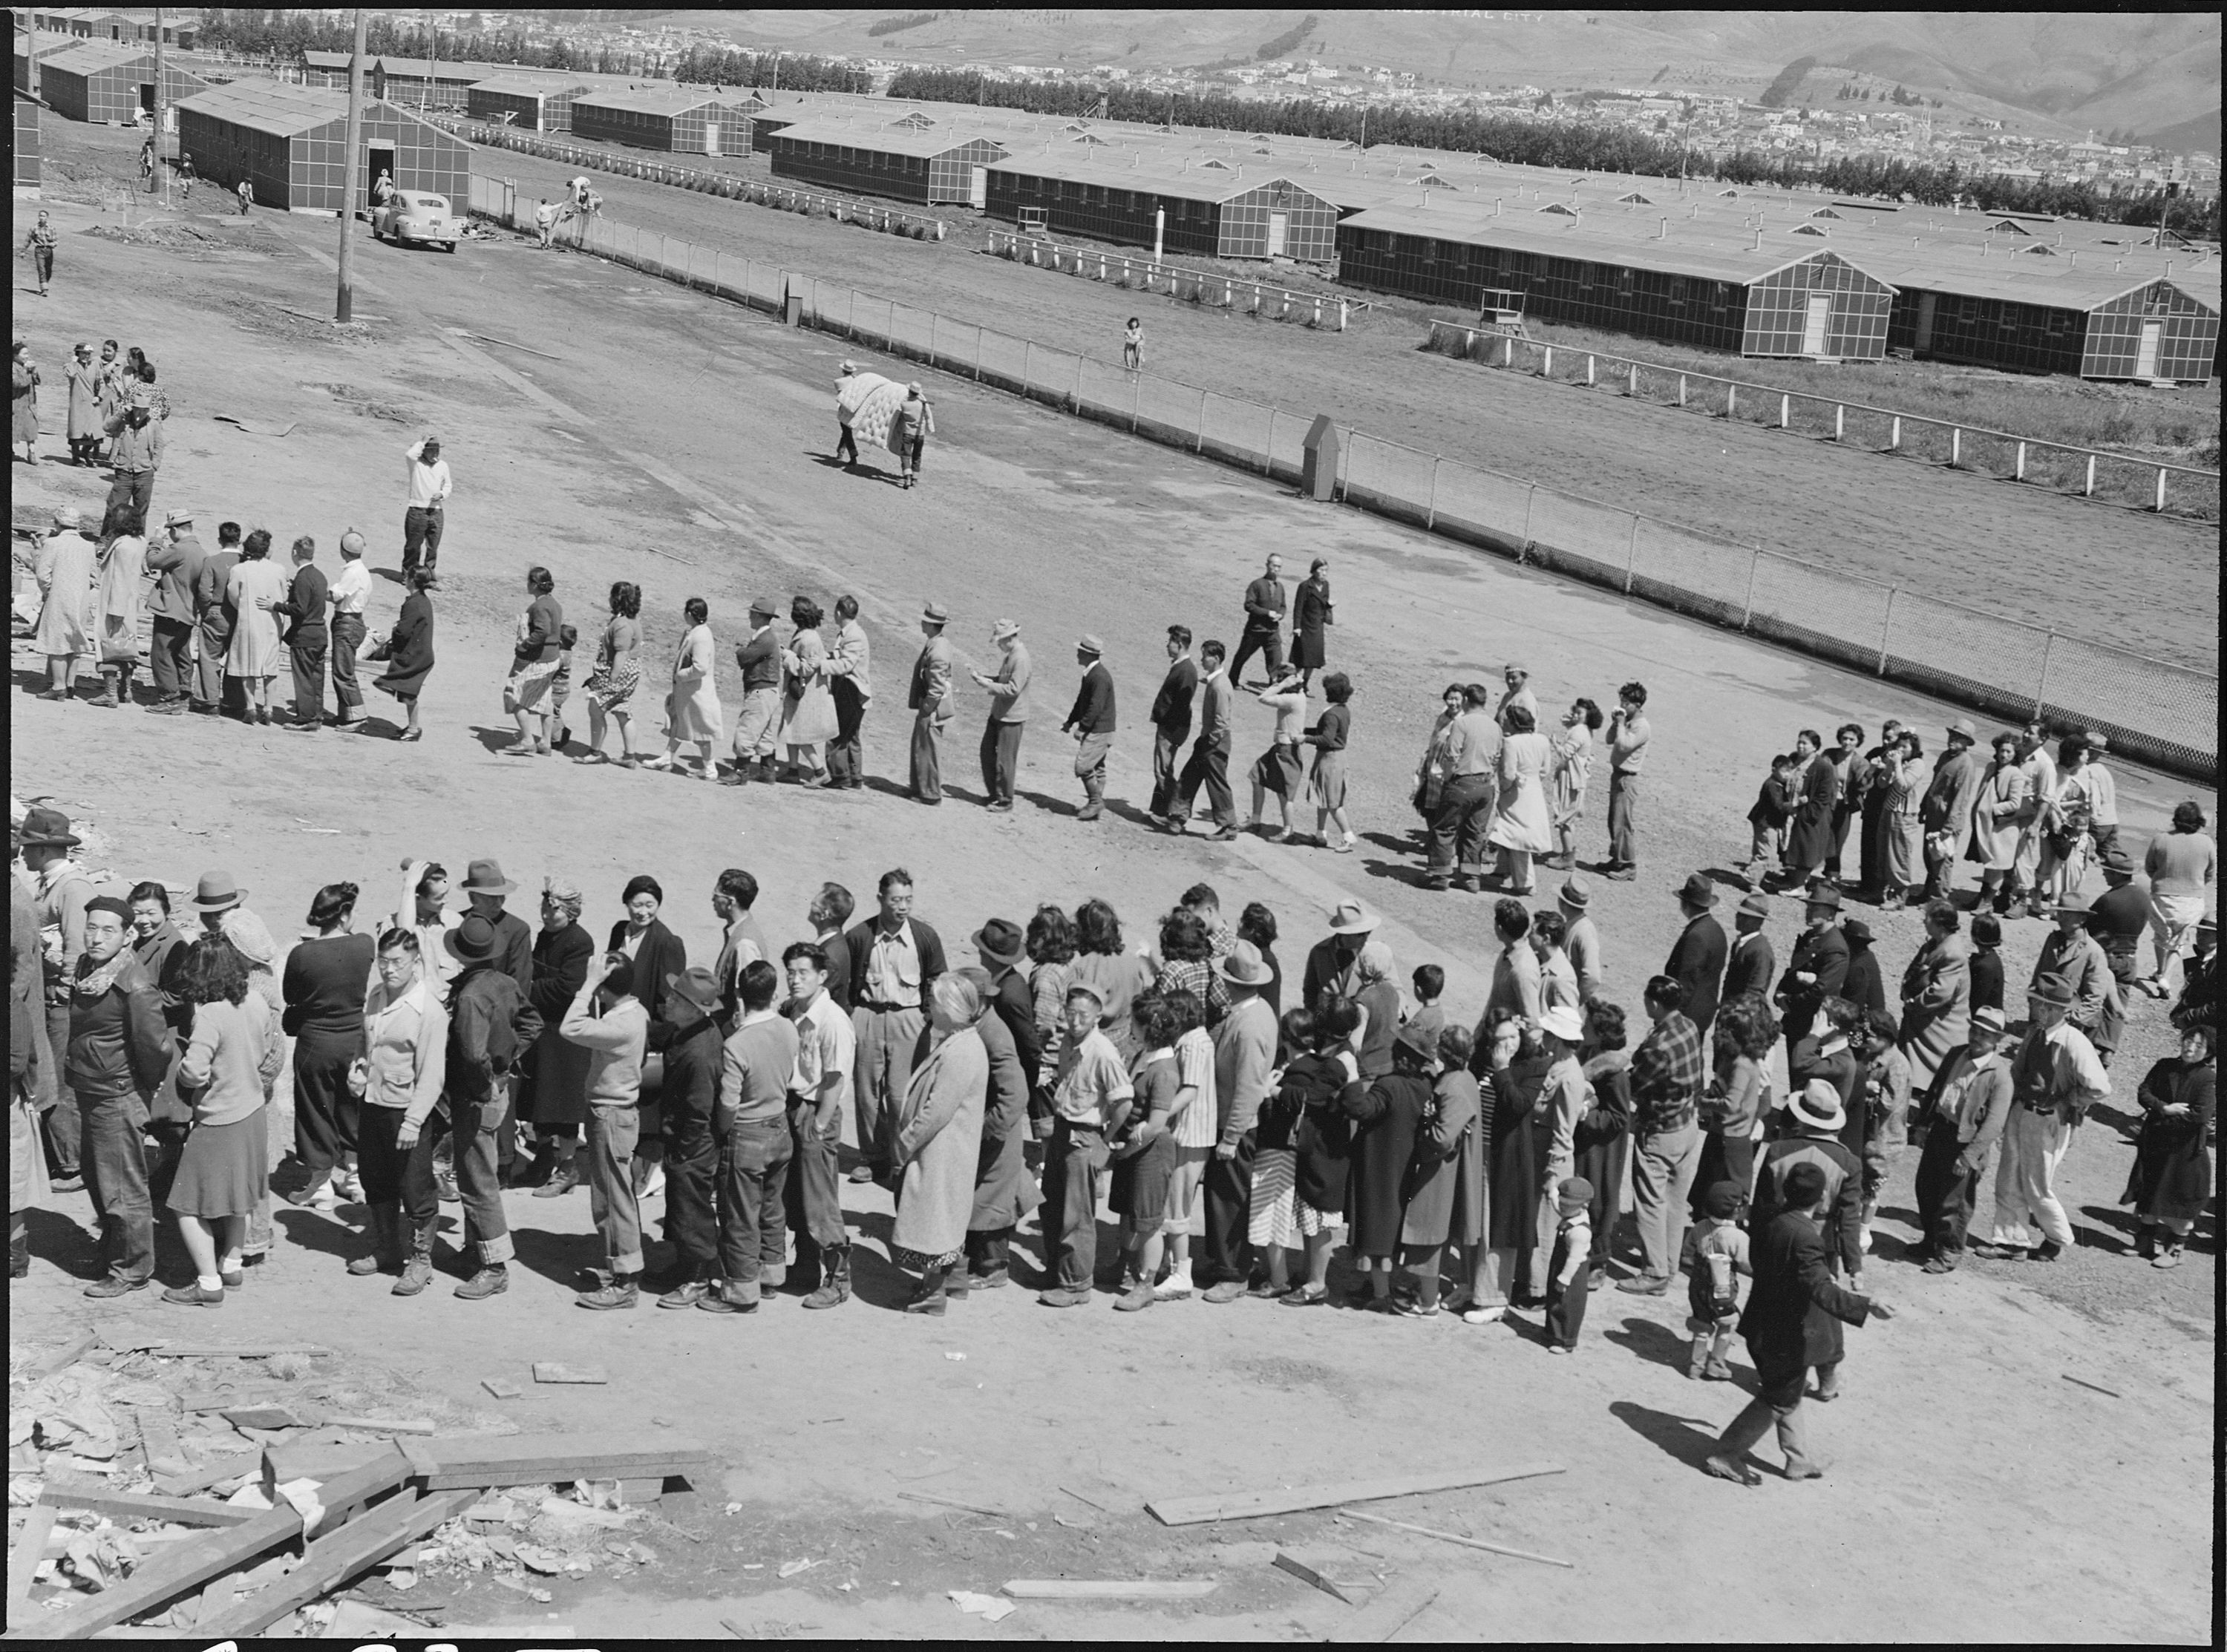 People line up on a former race track.